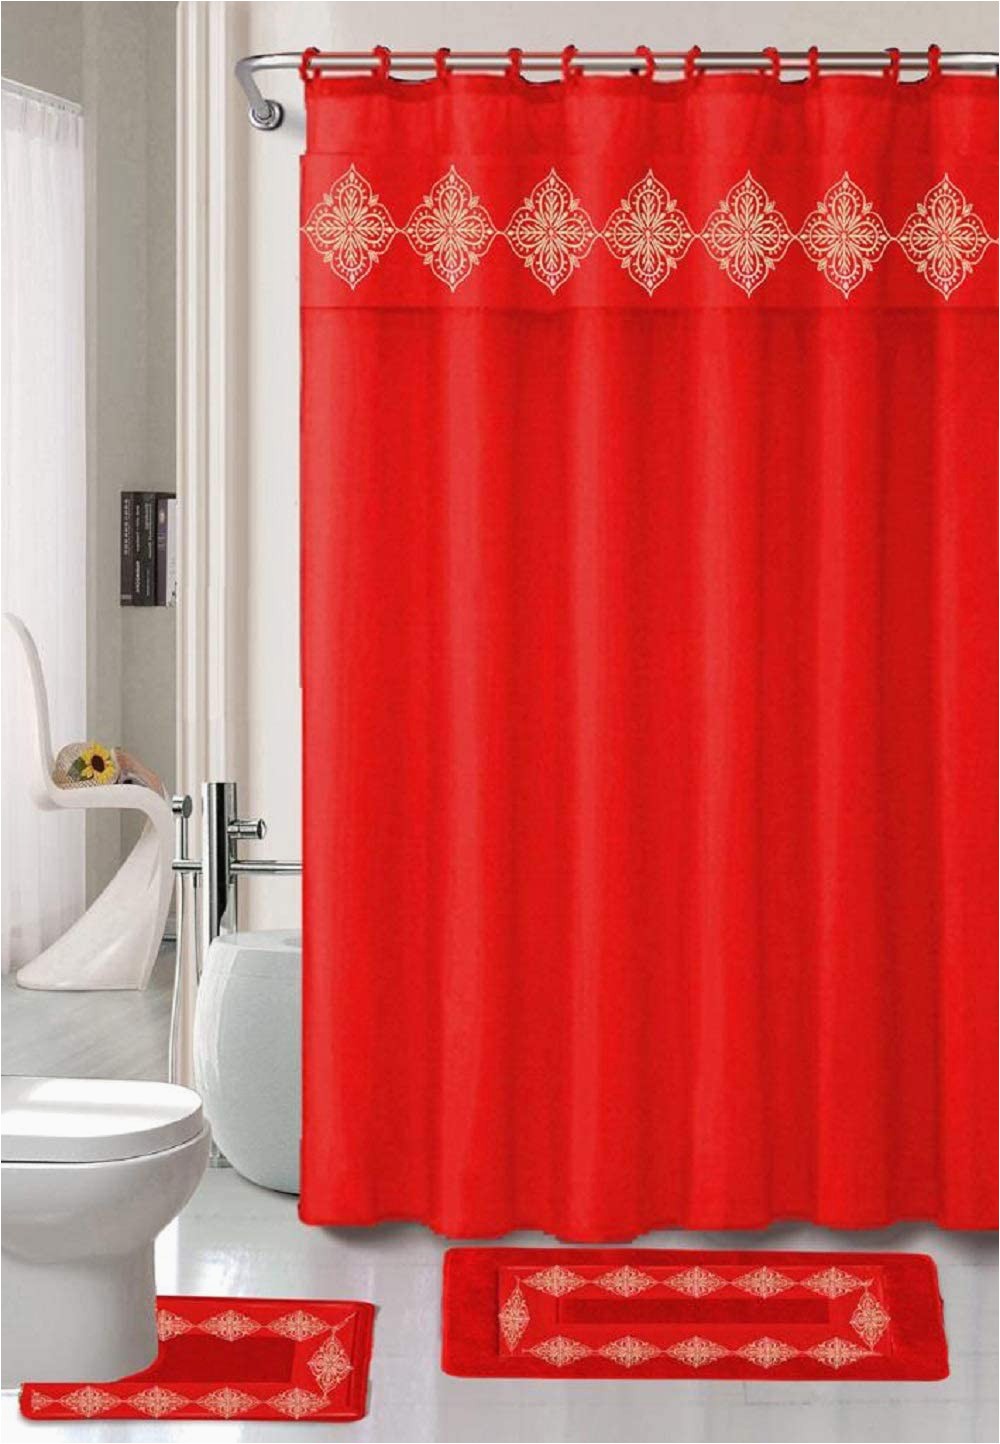 Gold Color Bathroom Rugs 4 Piece Bathroom Rugs Set Non Slip Red Gold Color Bath Rug toilet Contour Mat with Fabric Shower Curtain and Matching Rings Daisy Red